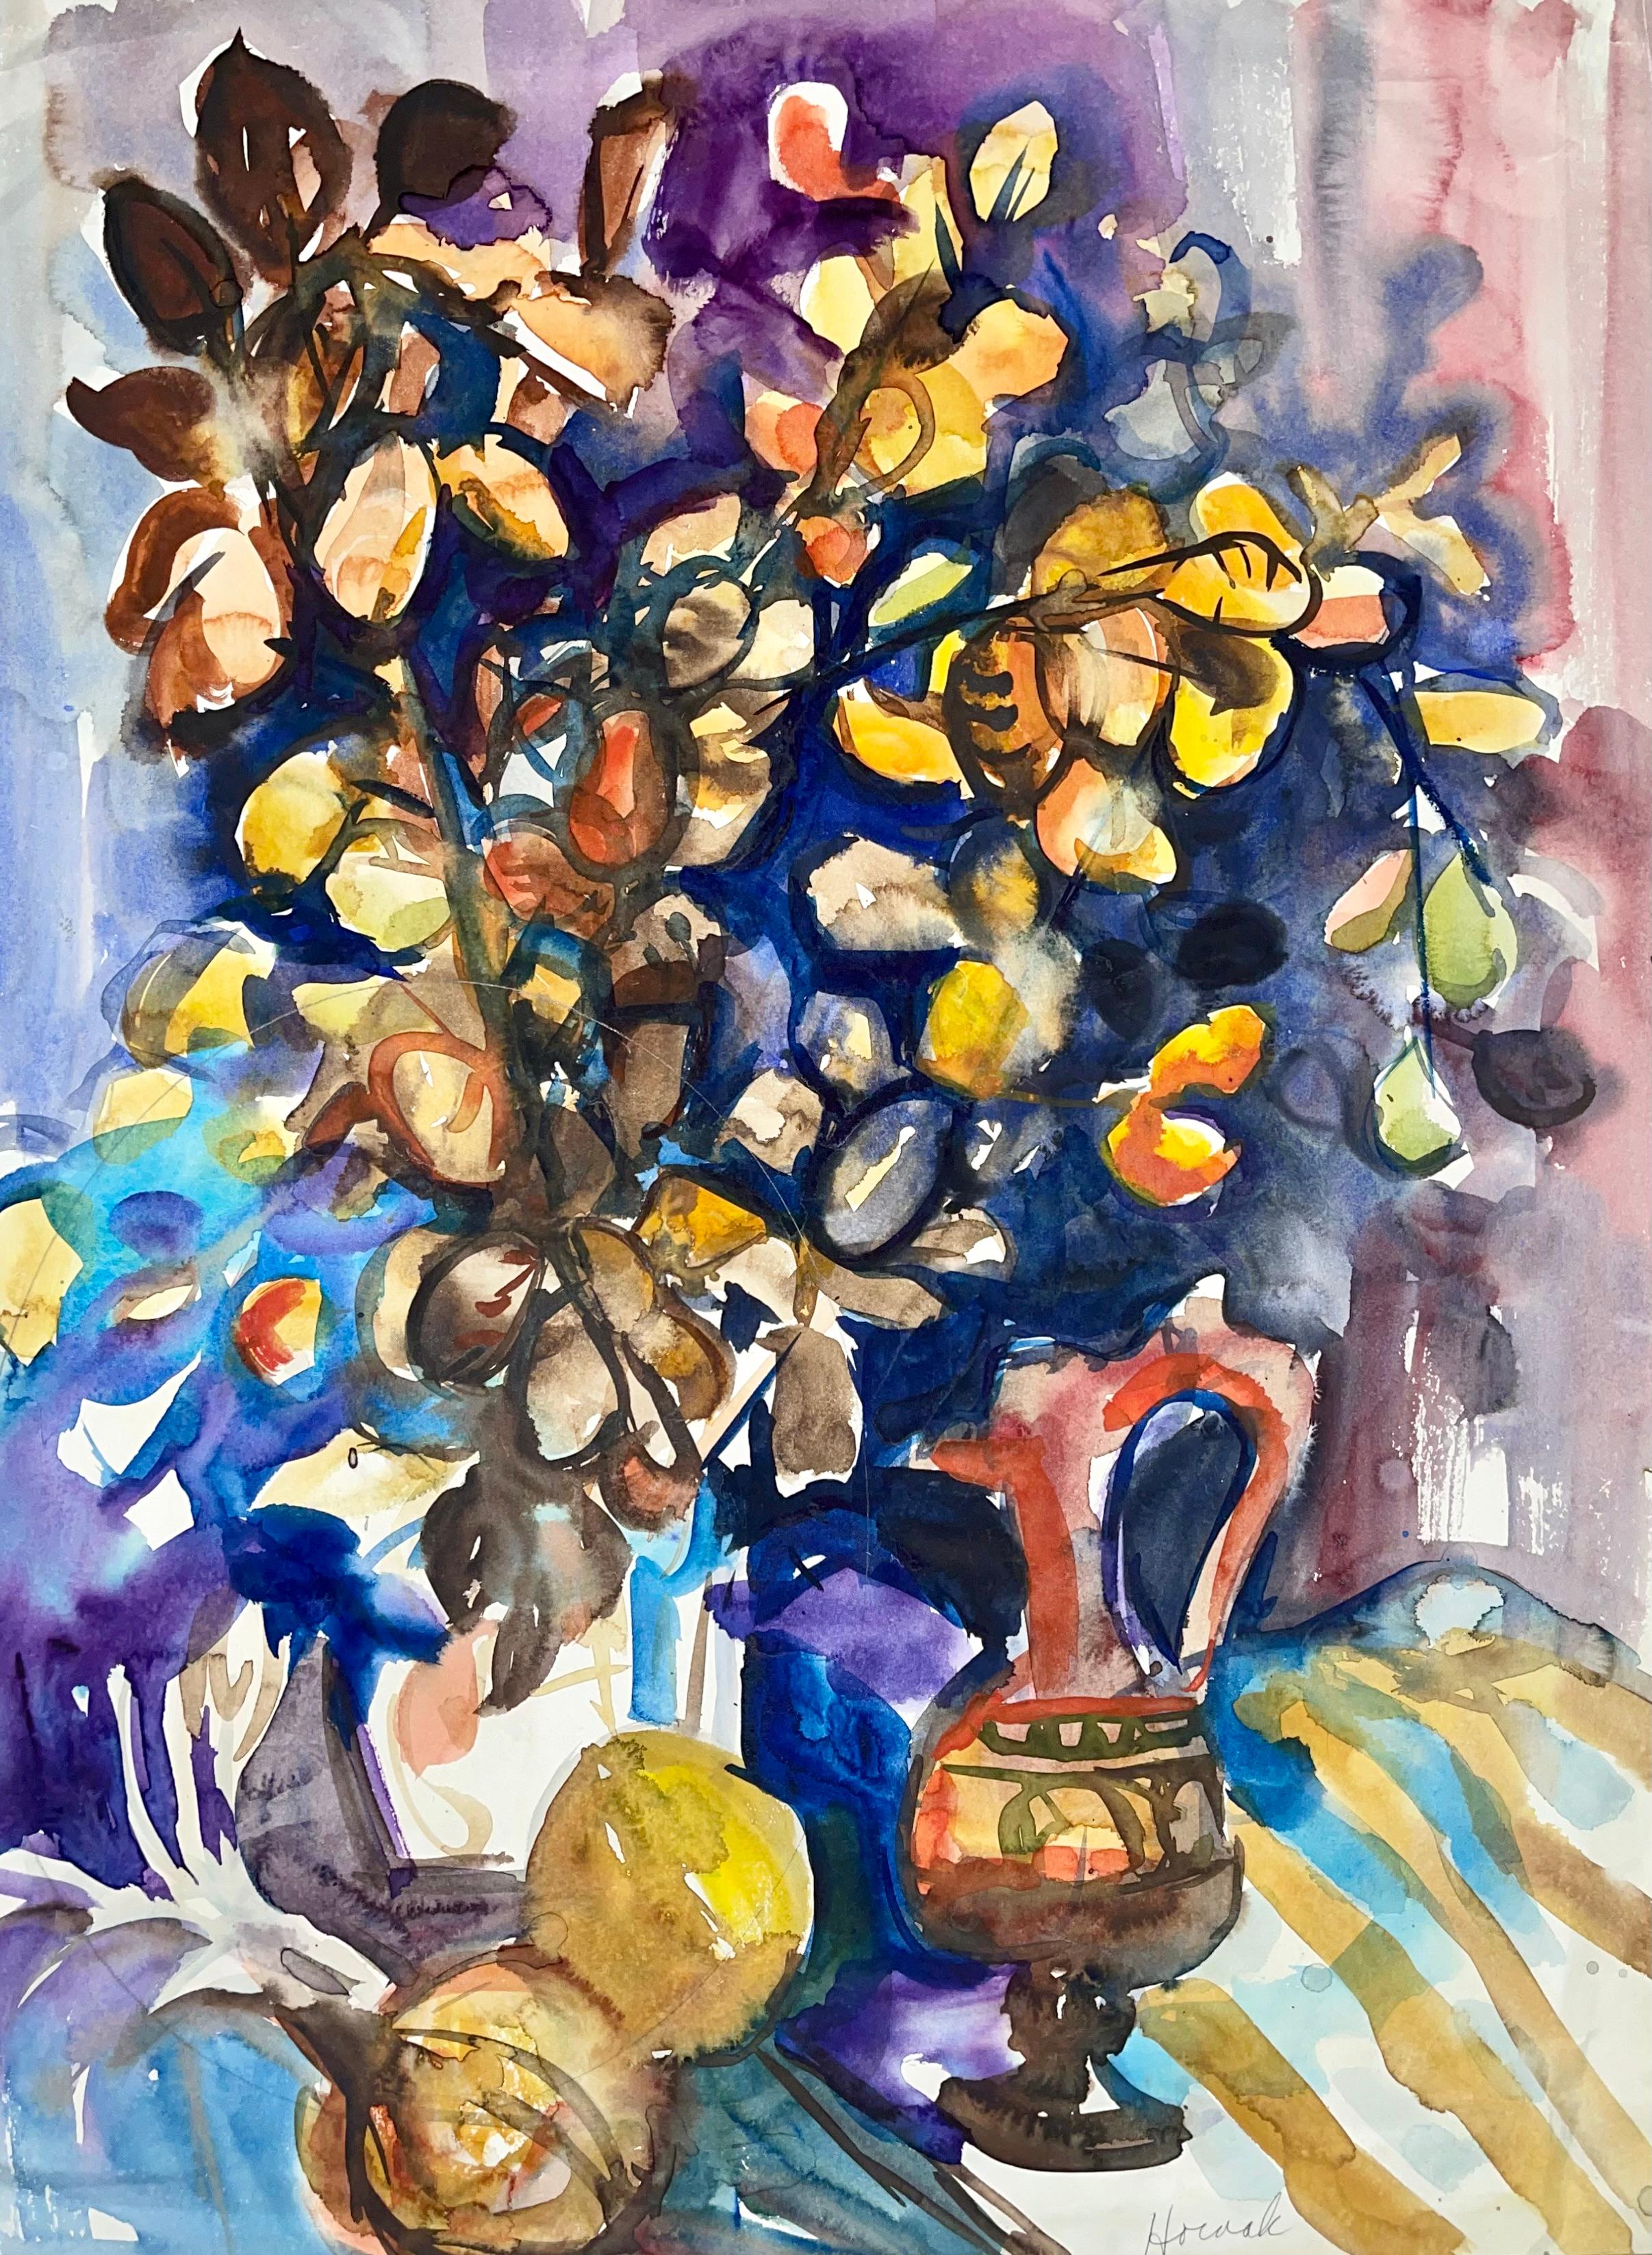 Untitled (Abstract Still Life with Flowers), 1963, Ian Hornak — Painting